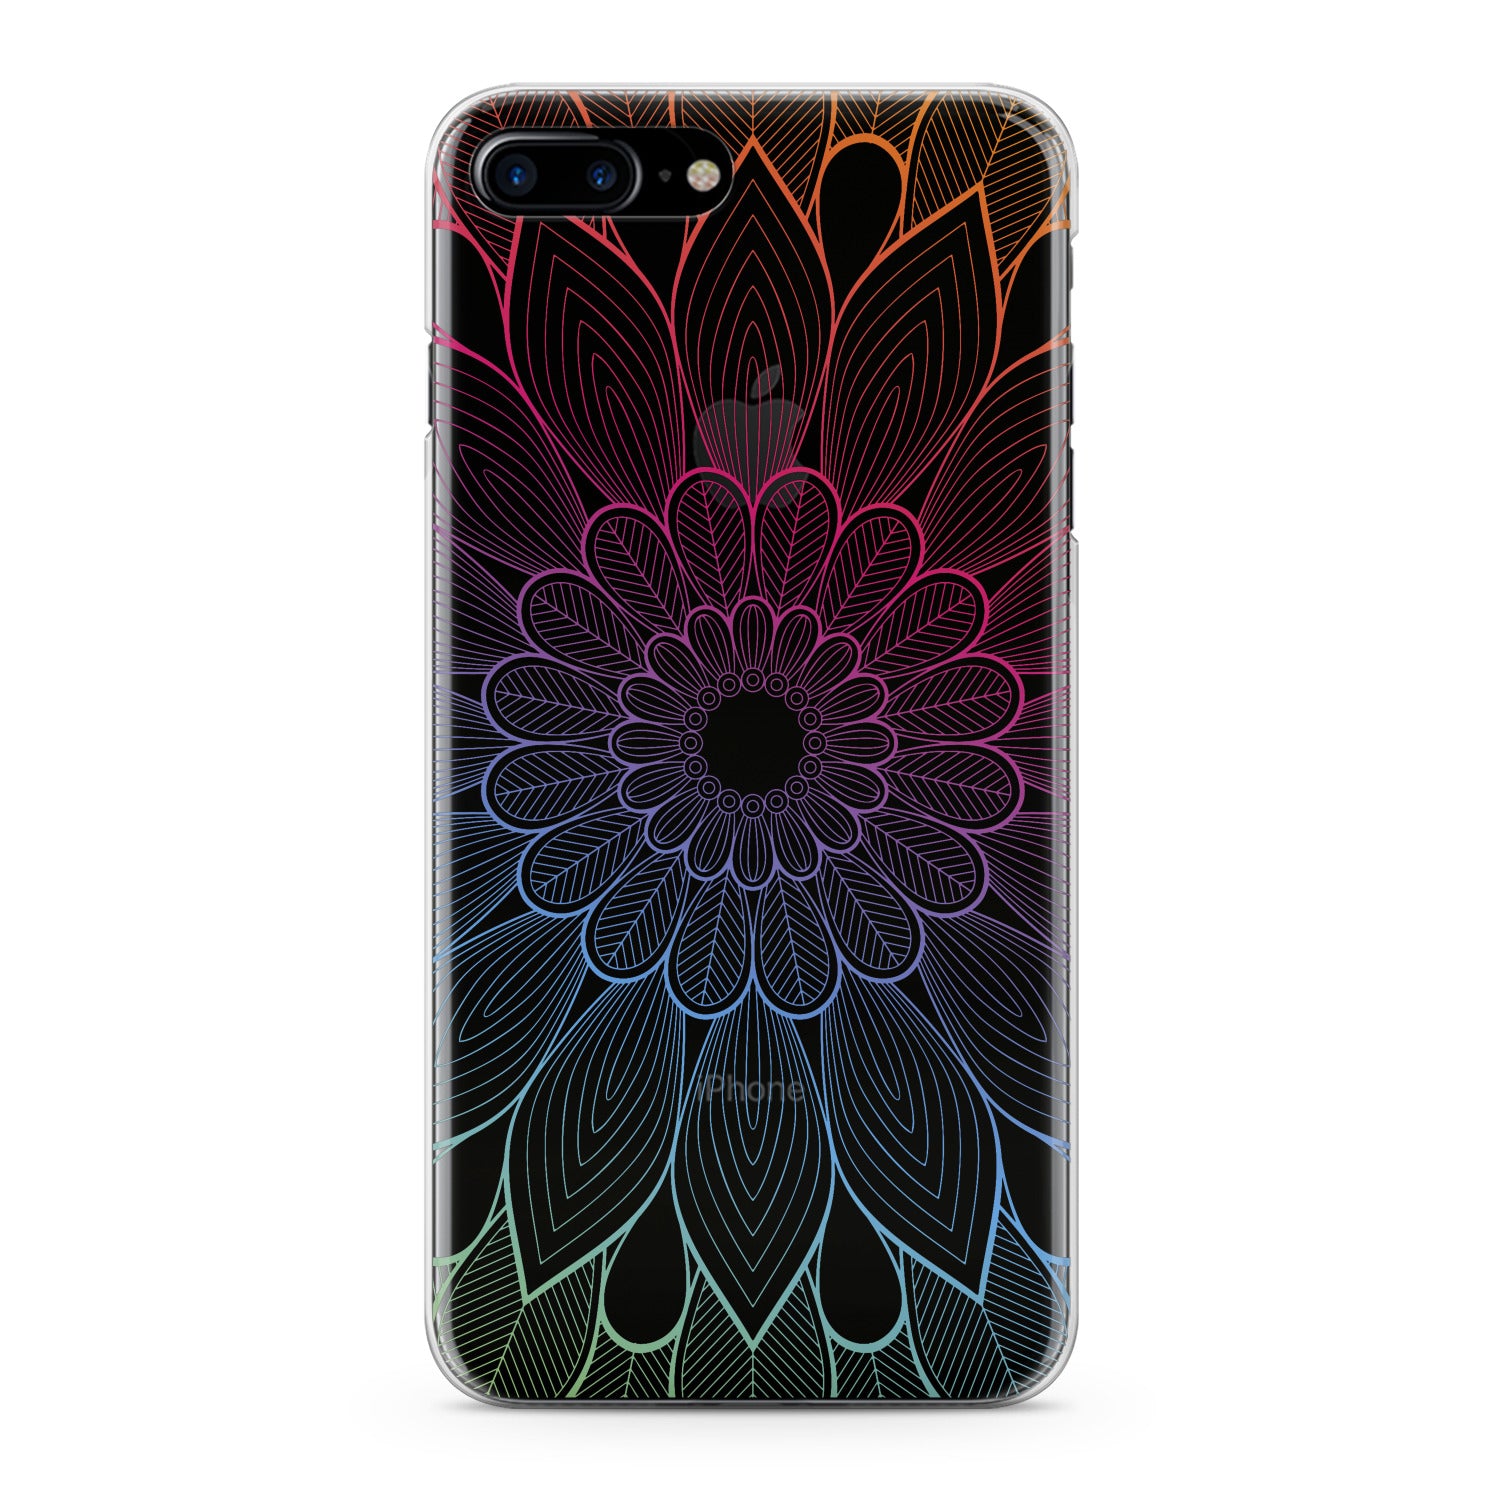 Lex Altern Colored Mandala Phone Case for your iPhone & Android phone.